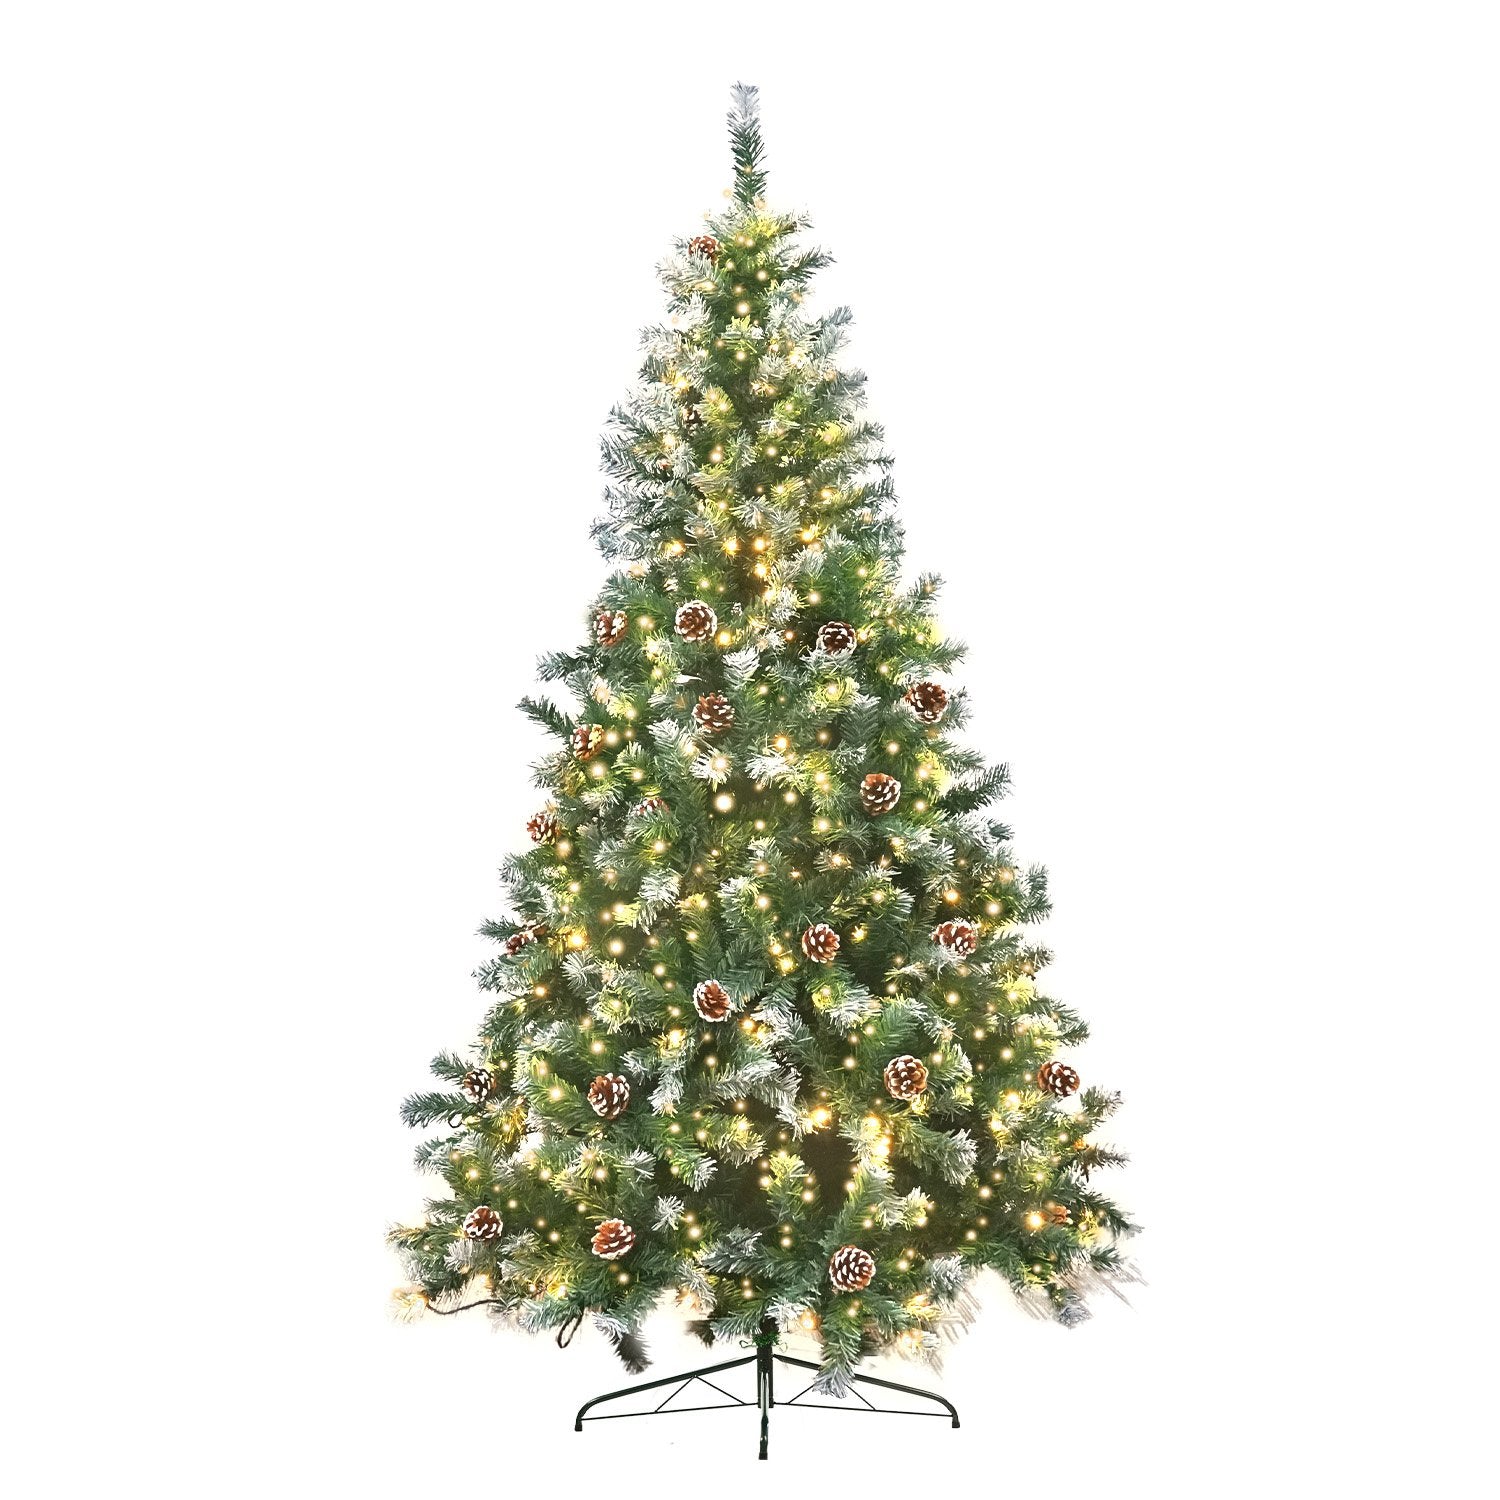 Christabelle 2.4m Pre Lit LED Christmas Tree Decor with Pine Cones Xmas Decorations - SILBERSHELL